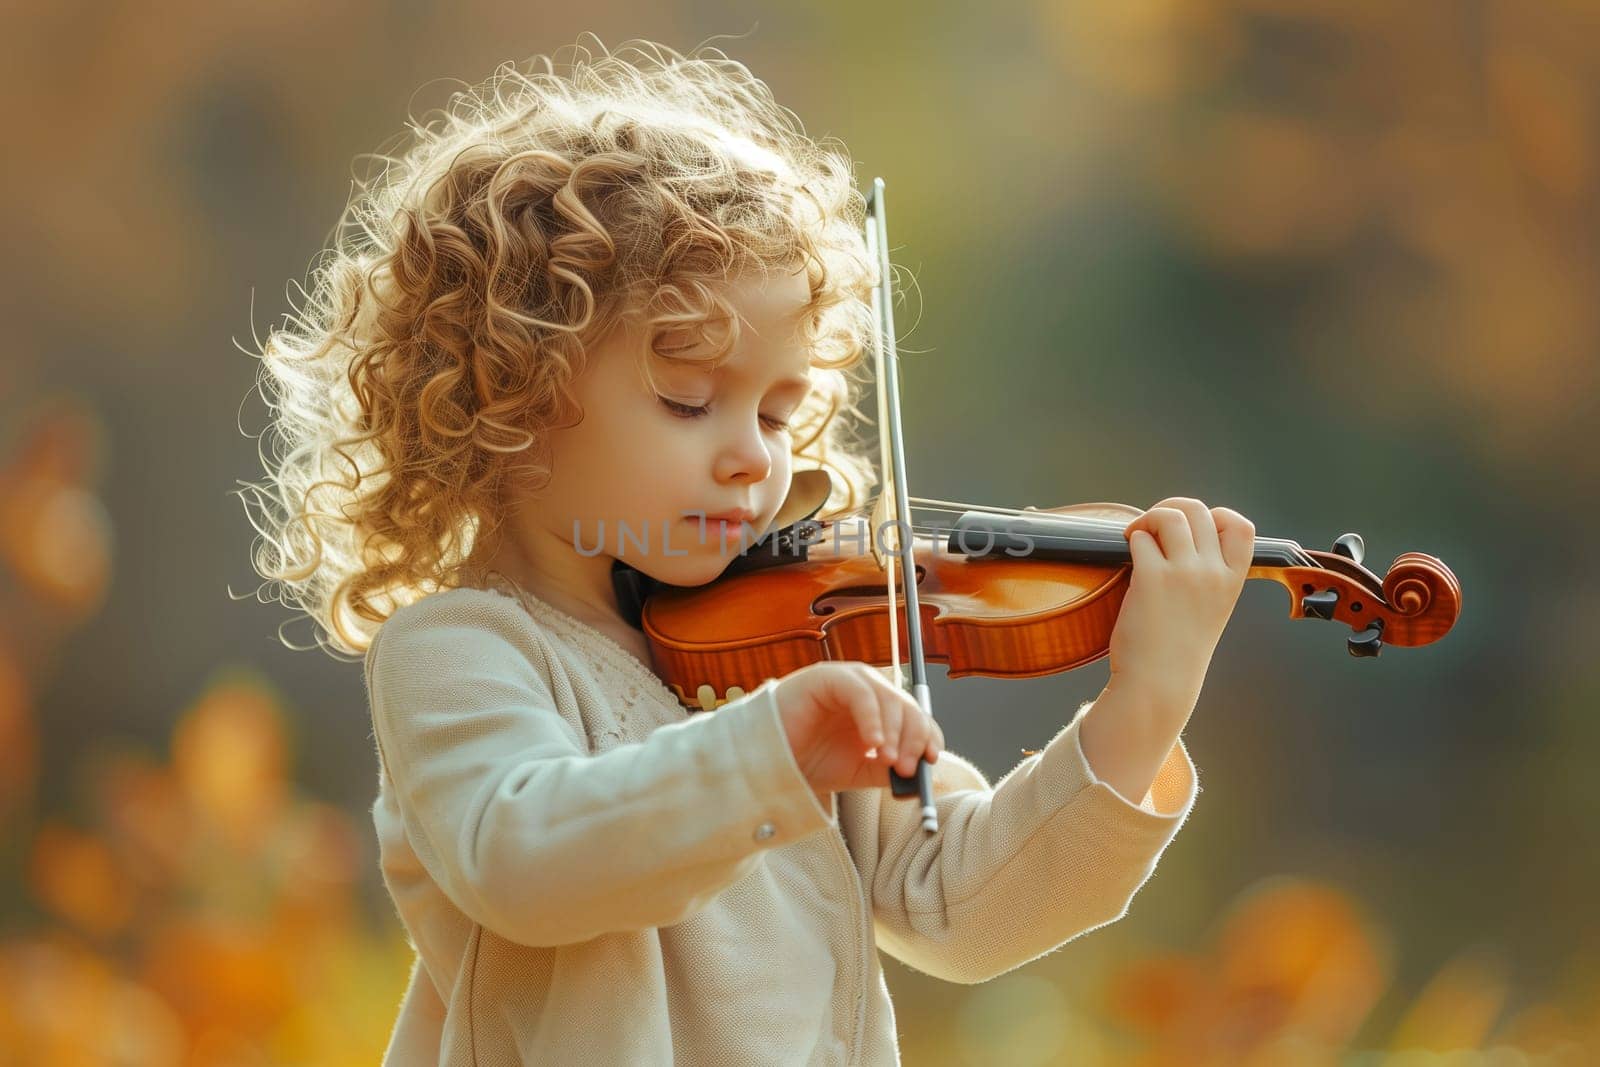 Child little girl playing music on the violin, creativity and hobby